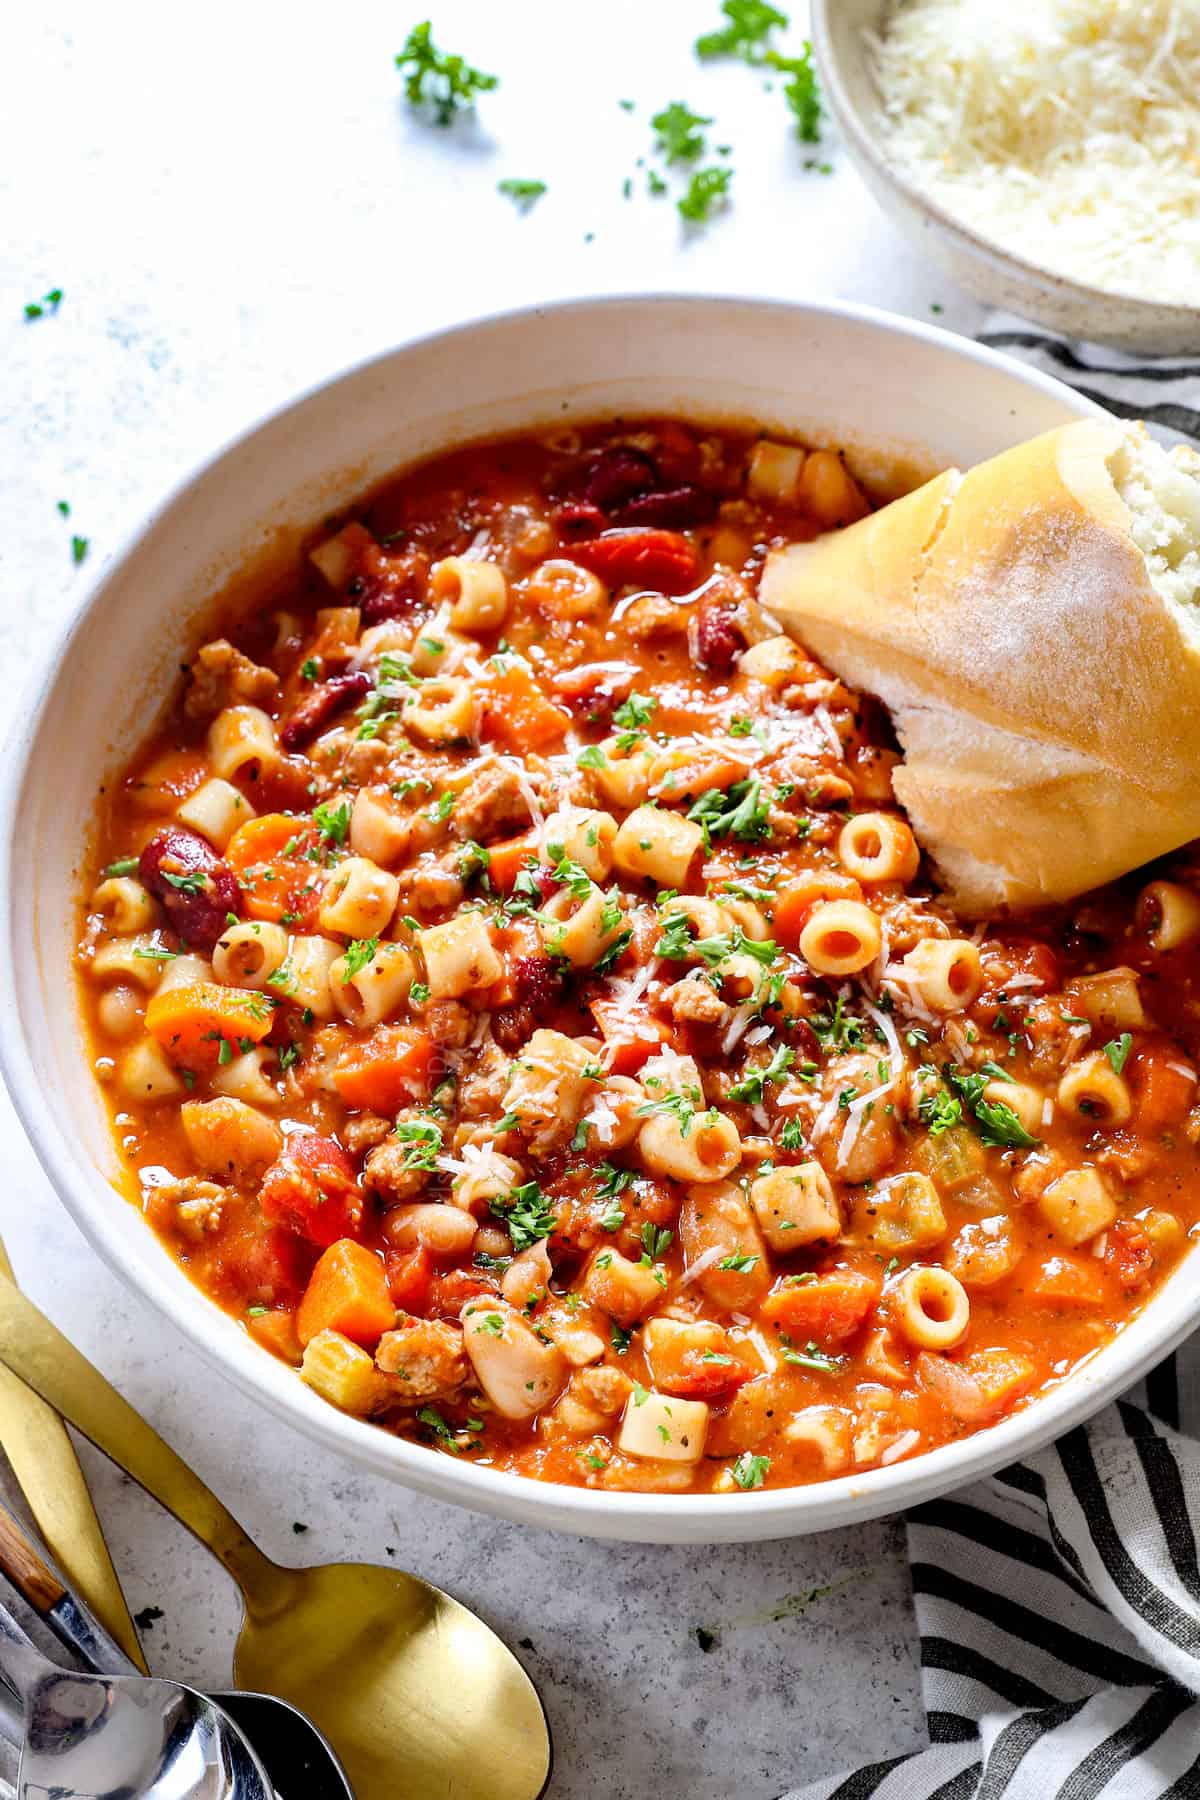 showing how to make pasta fagioli (pasta fazool) in a bowl with bread